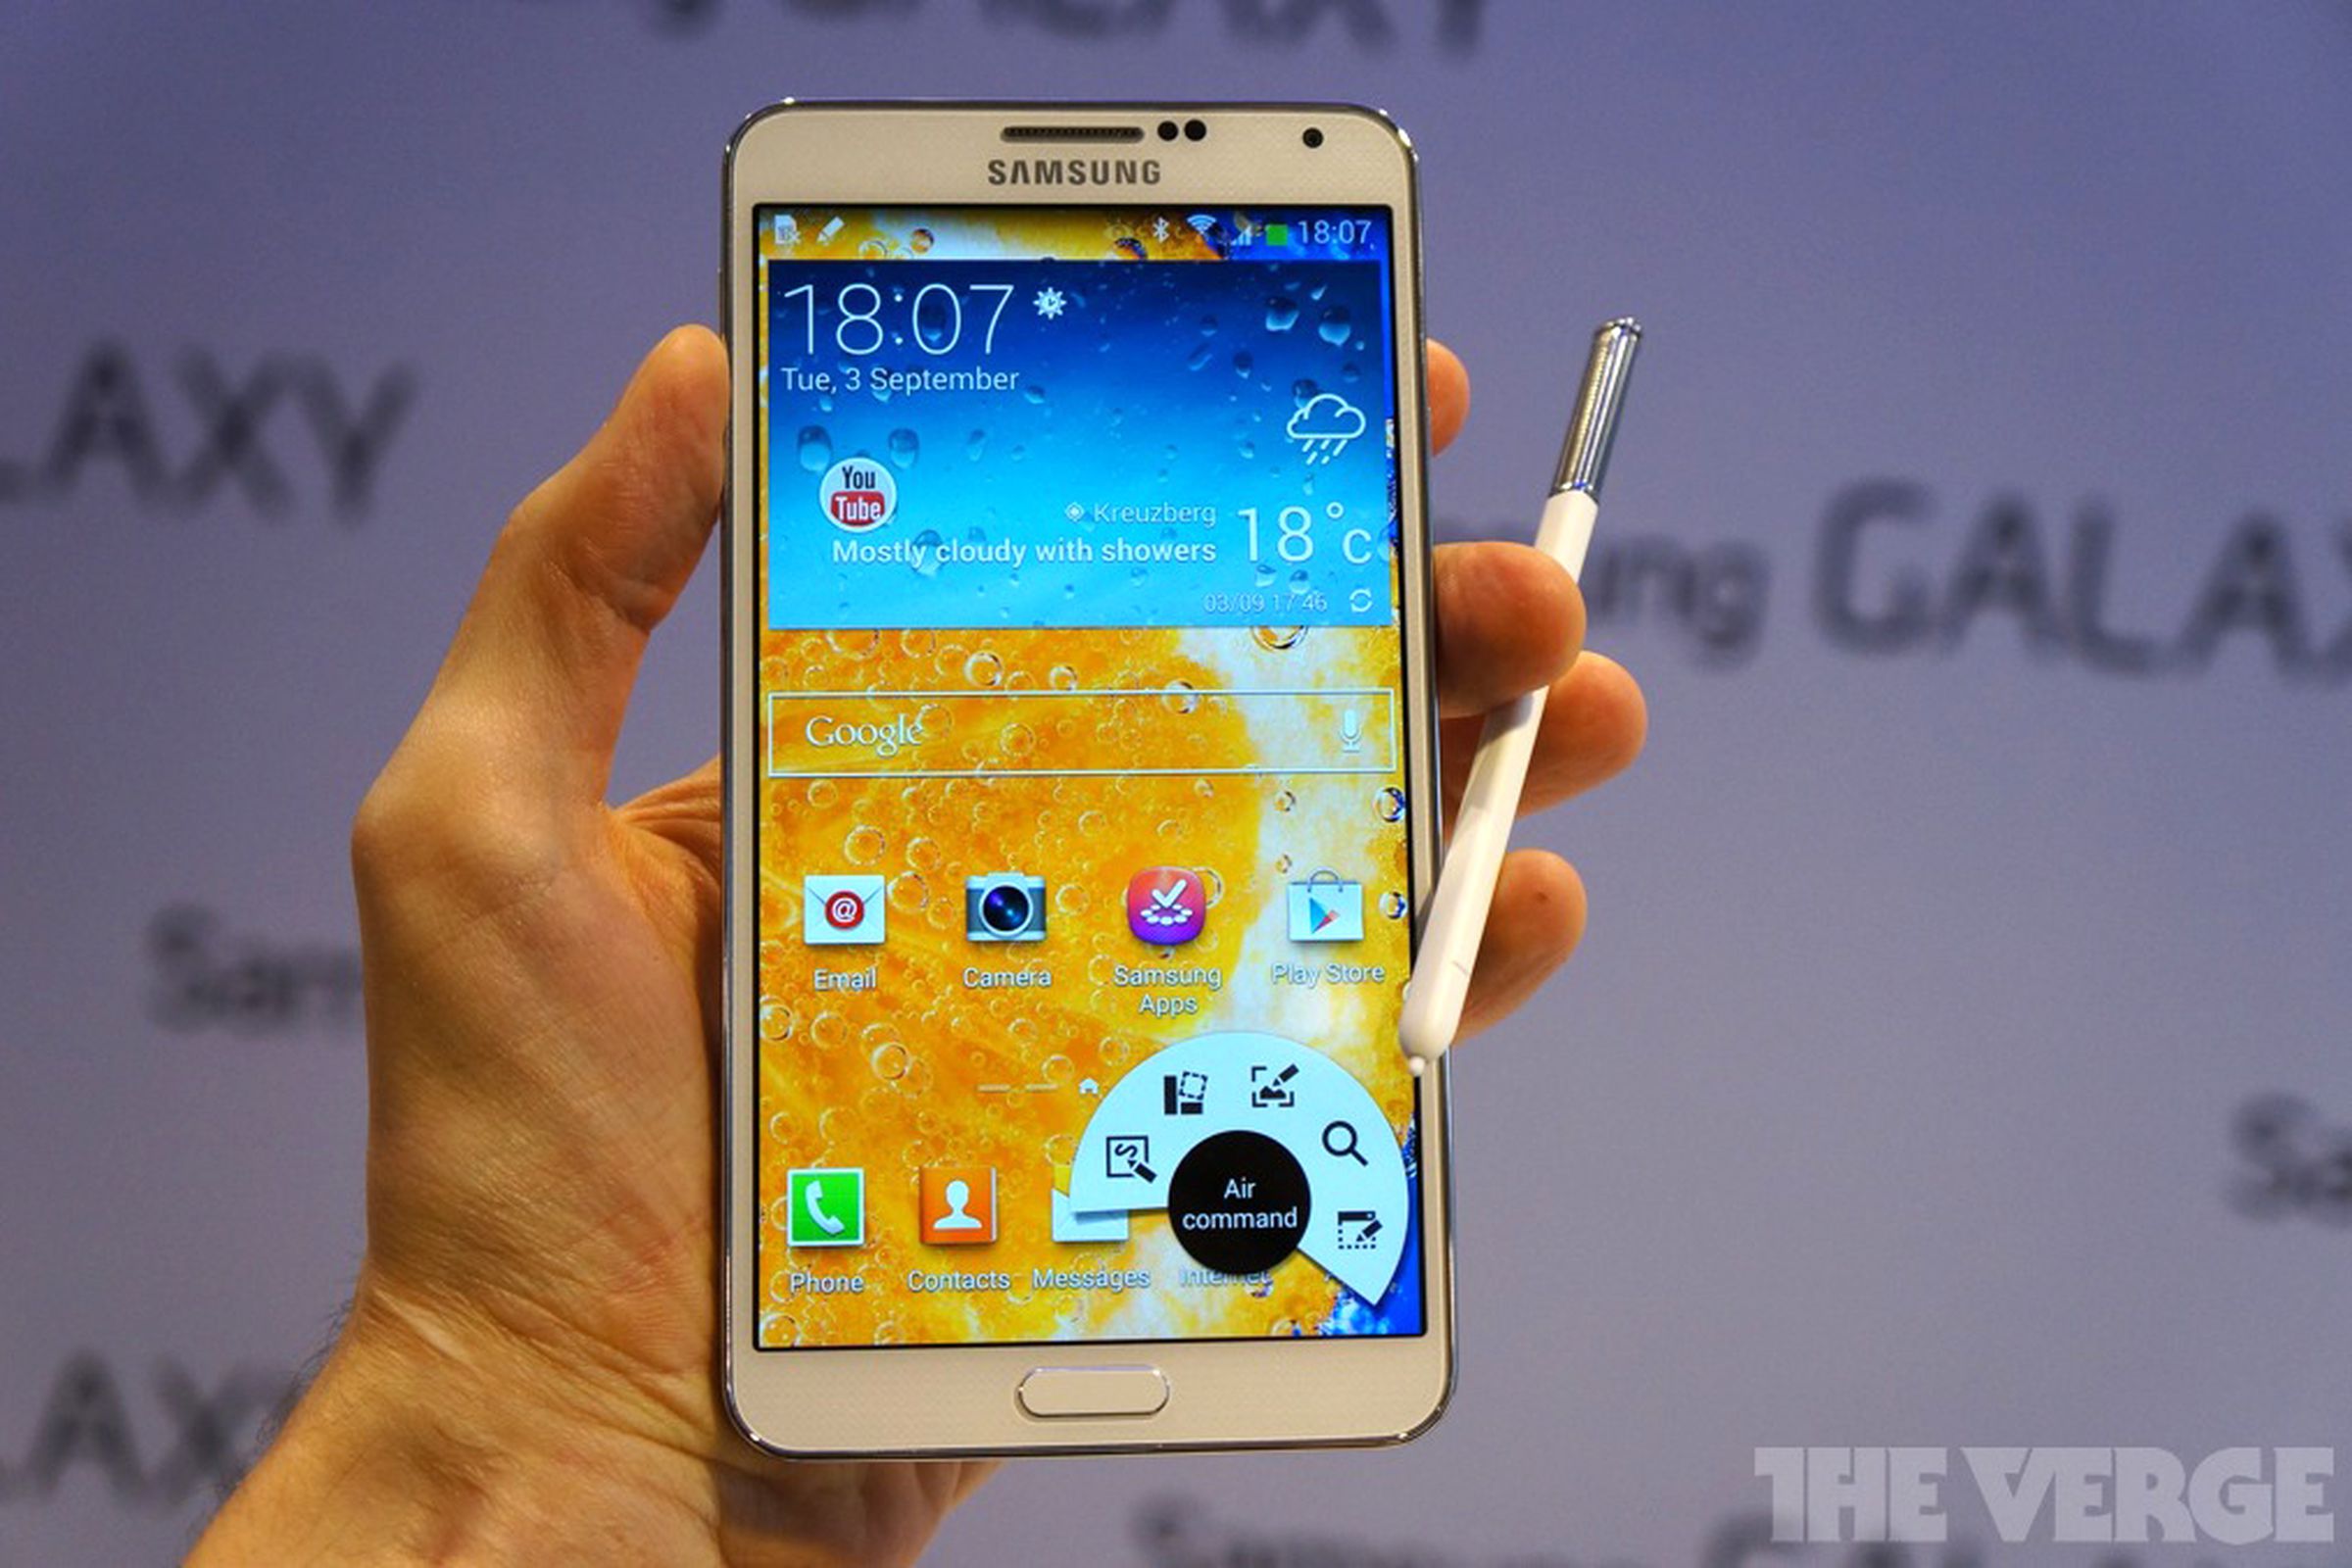 Galaxy Note 3 stock (brighter)